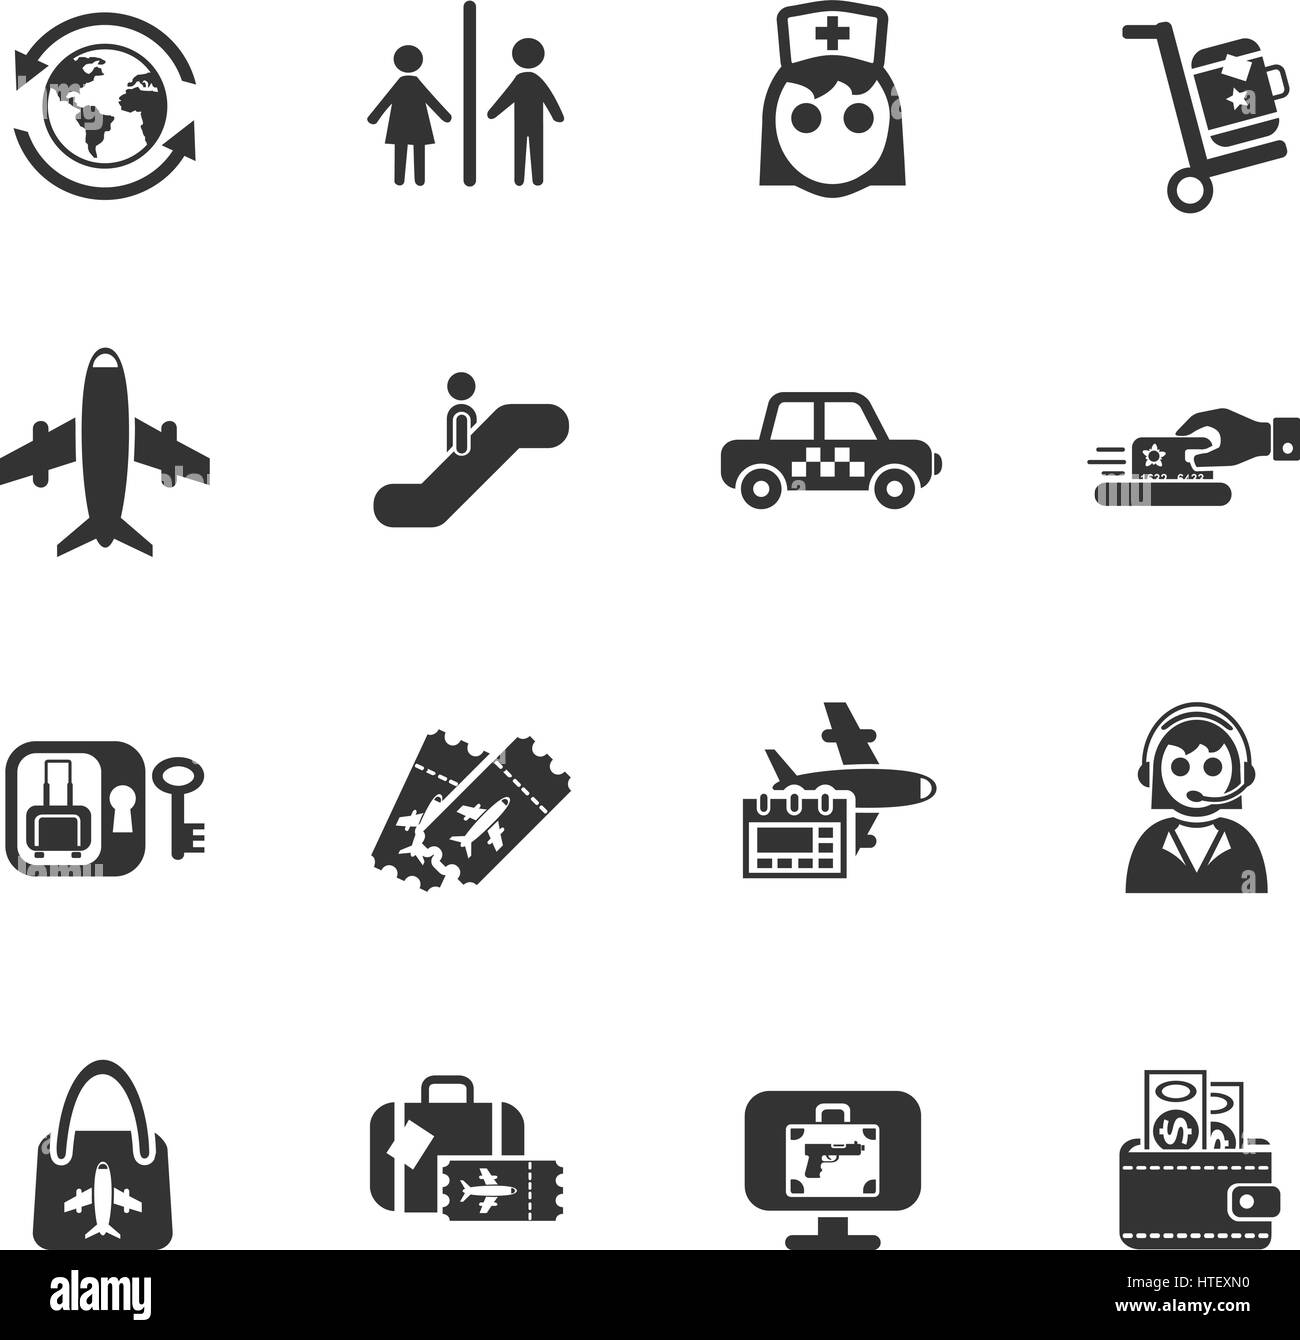 airport web icons for user interface design Stock Vector